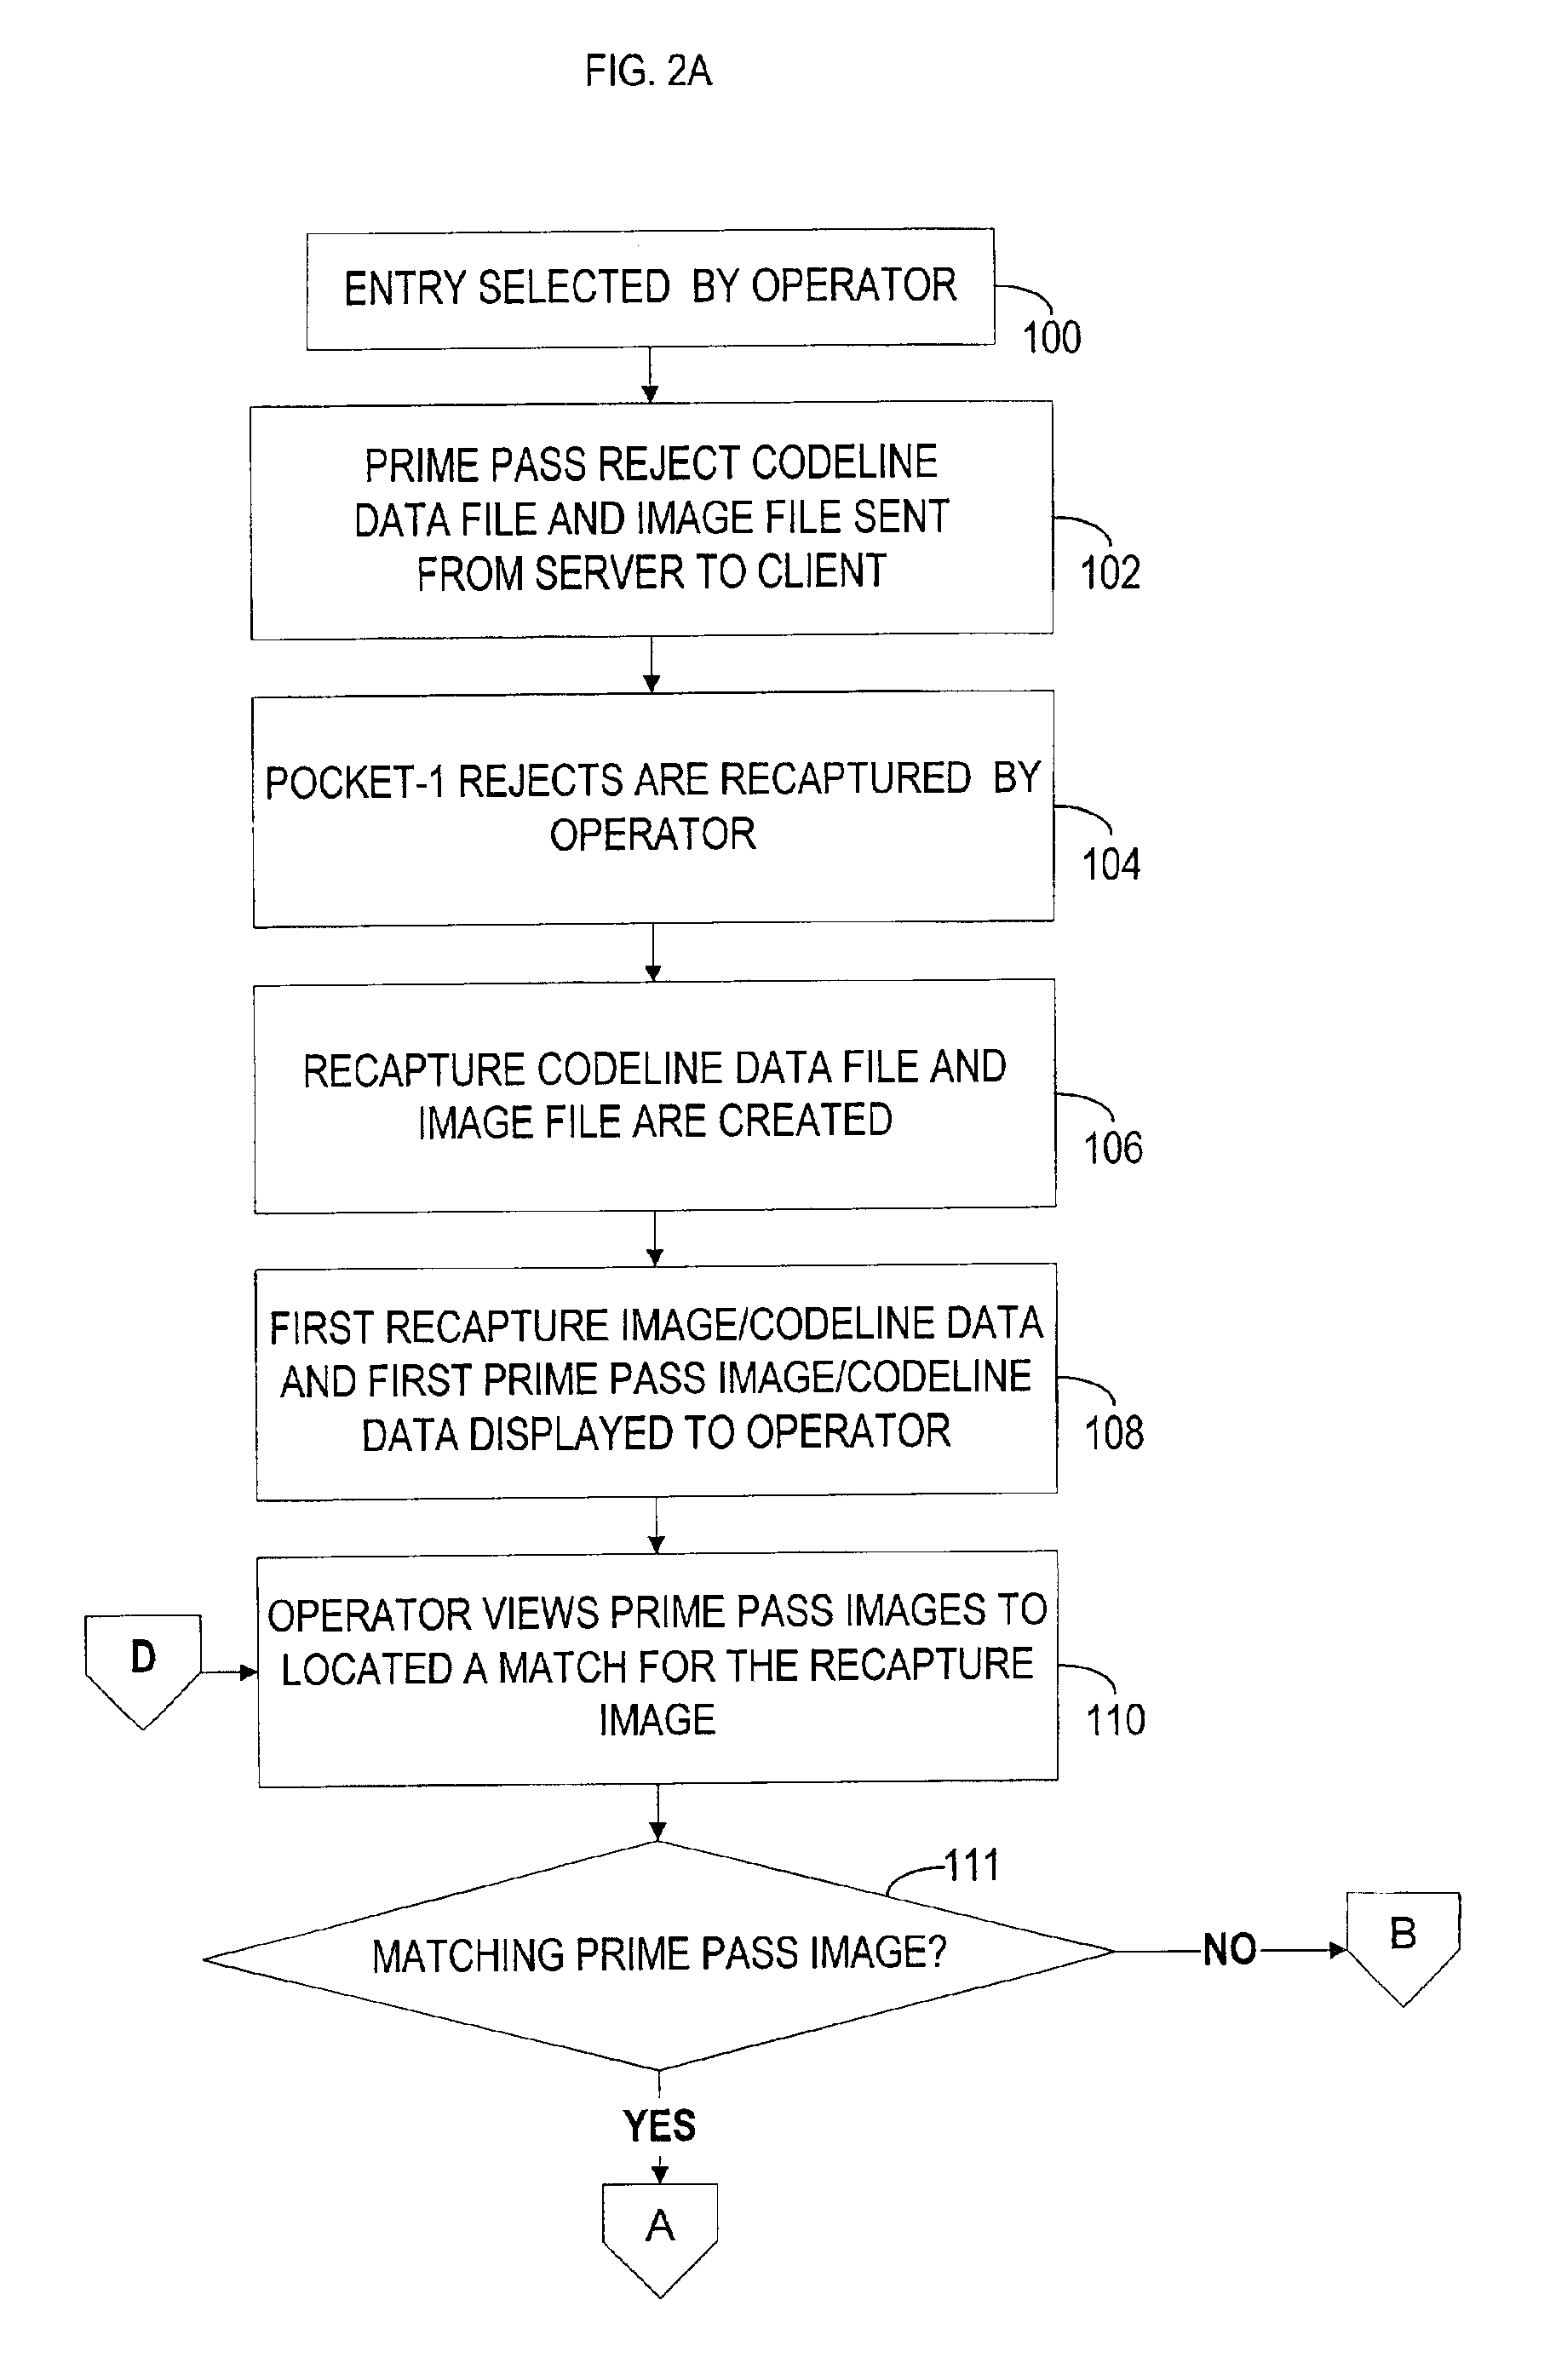 Image enabled reject repair for check processing capture